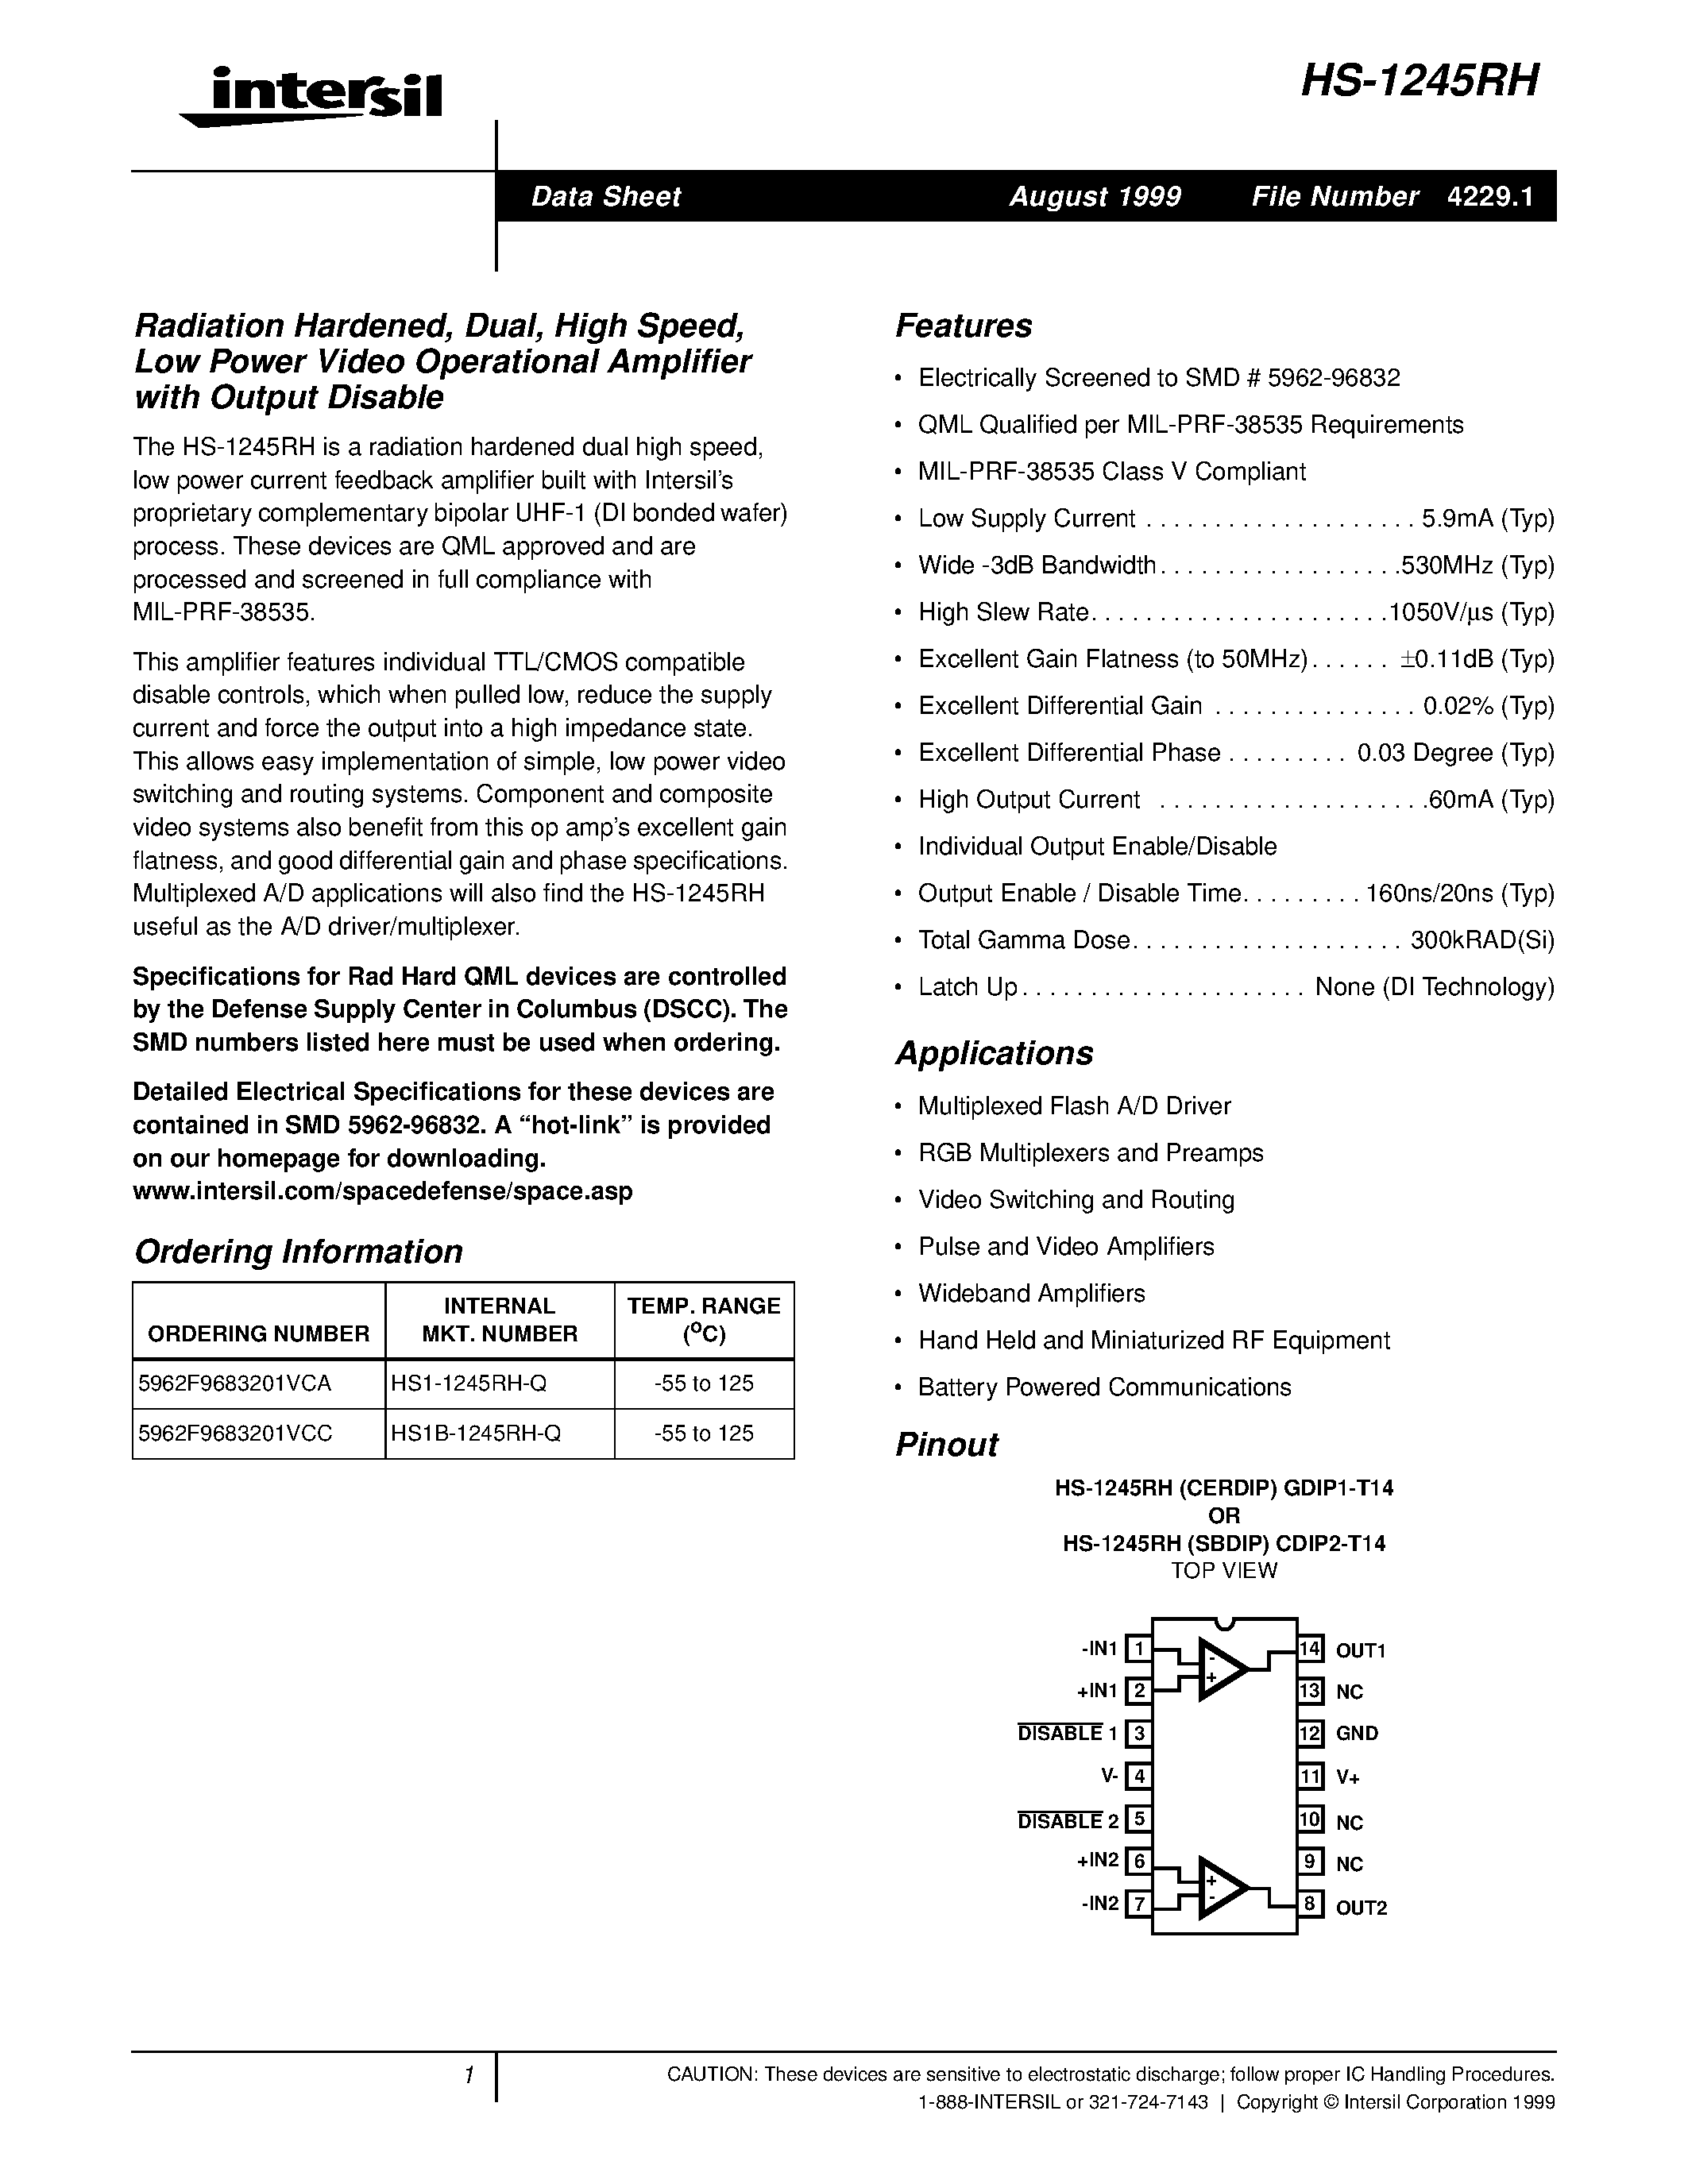 Datasheet HS1B-1245RH-Q - Radiation Hardened/ Dual/ High Speed/ Low Power Video Operational Amplifier with Output Disable page 1